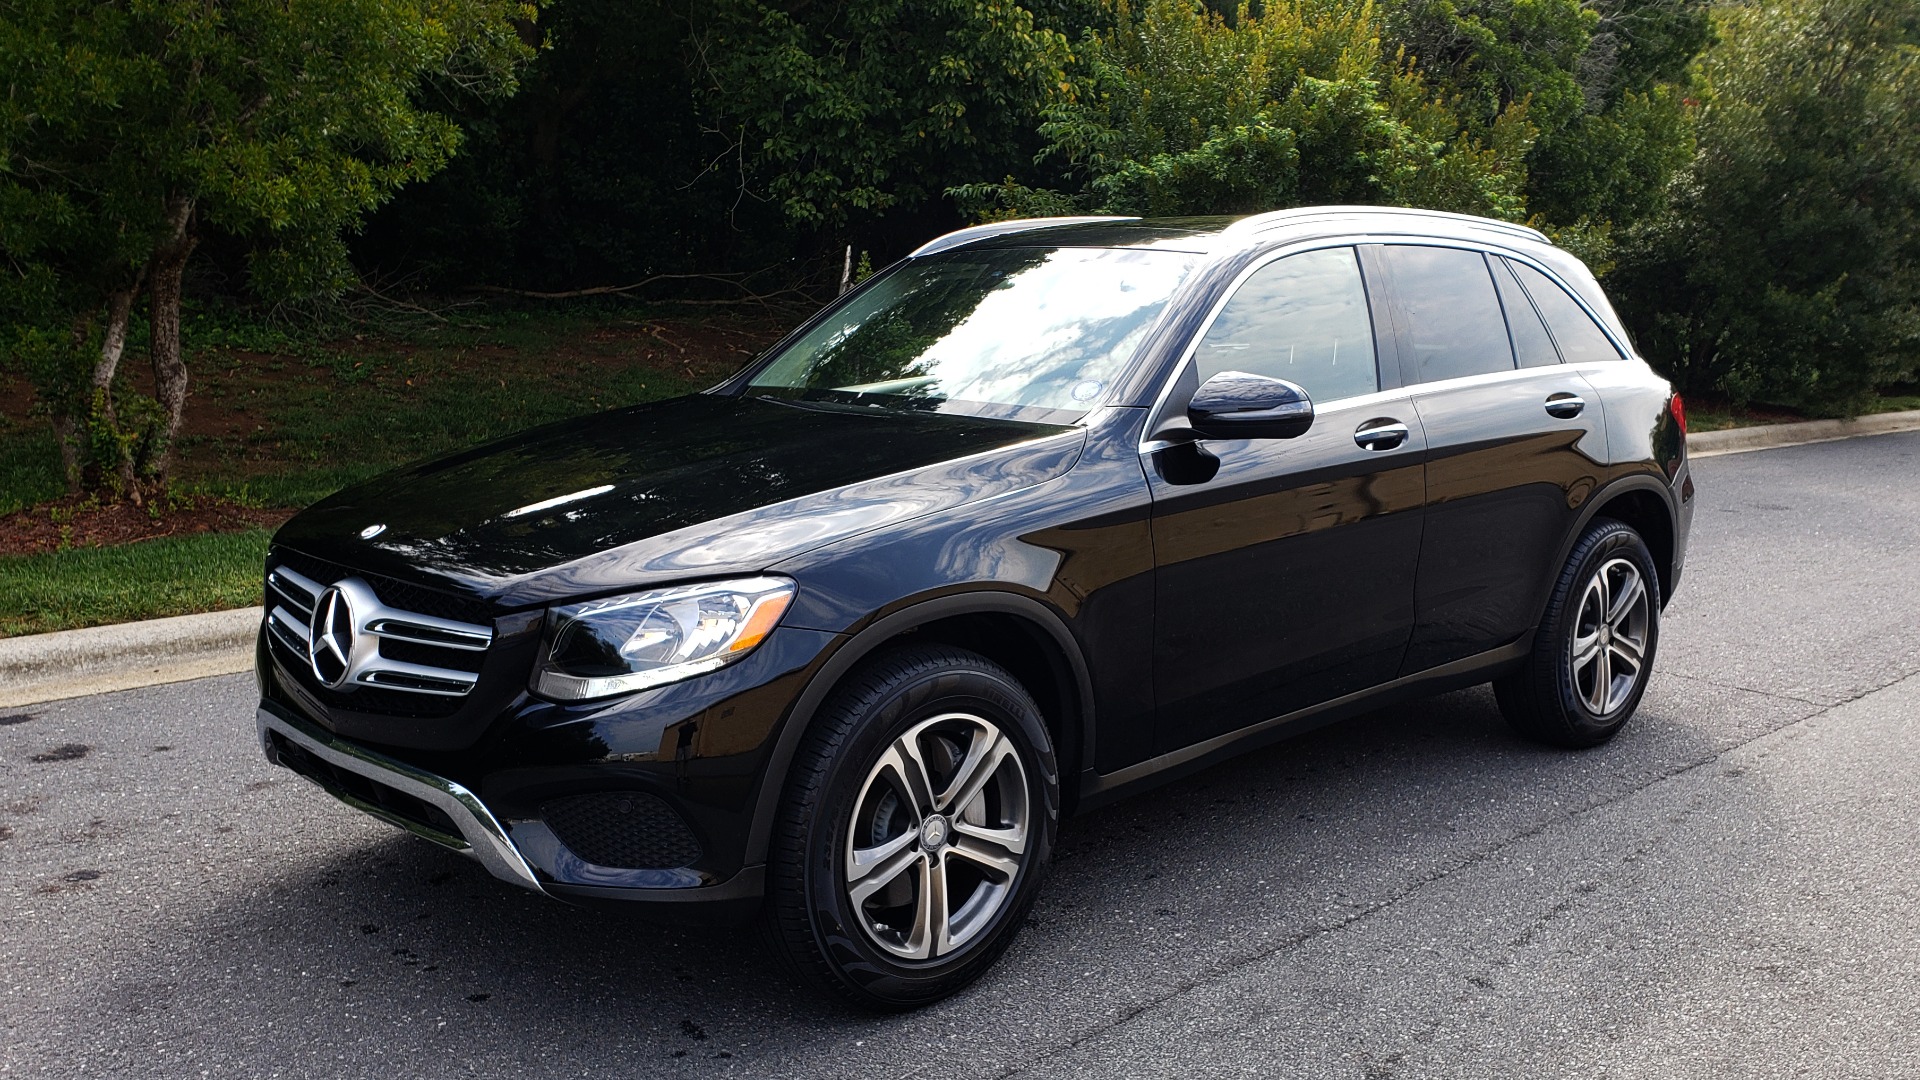 Used 2016 Mercedes-Benz GLC 300 / PANO-ROOF / HEATED SEATS / REARVIEW / NEW TIRES for sale Sold at Formula Imports in Charlotte NC 28227 1